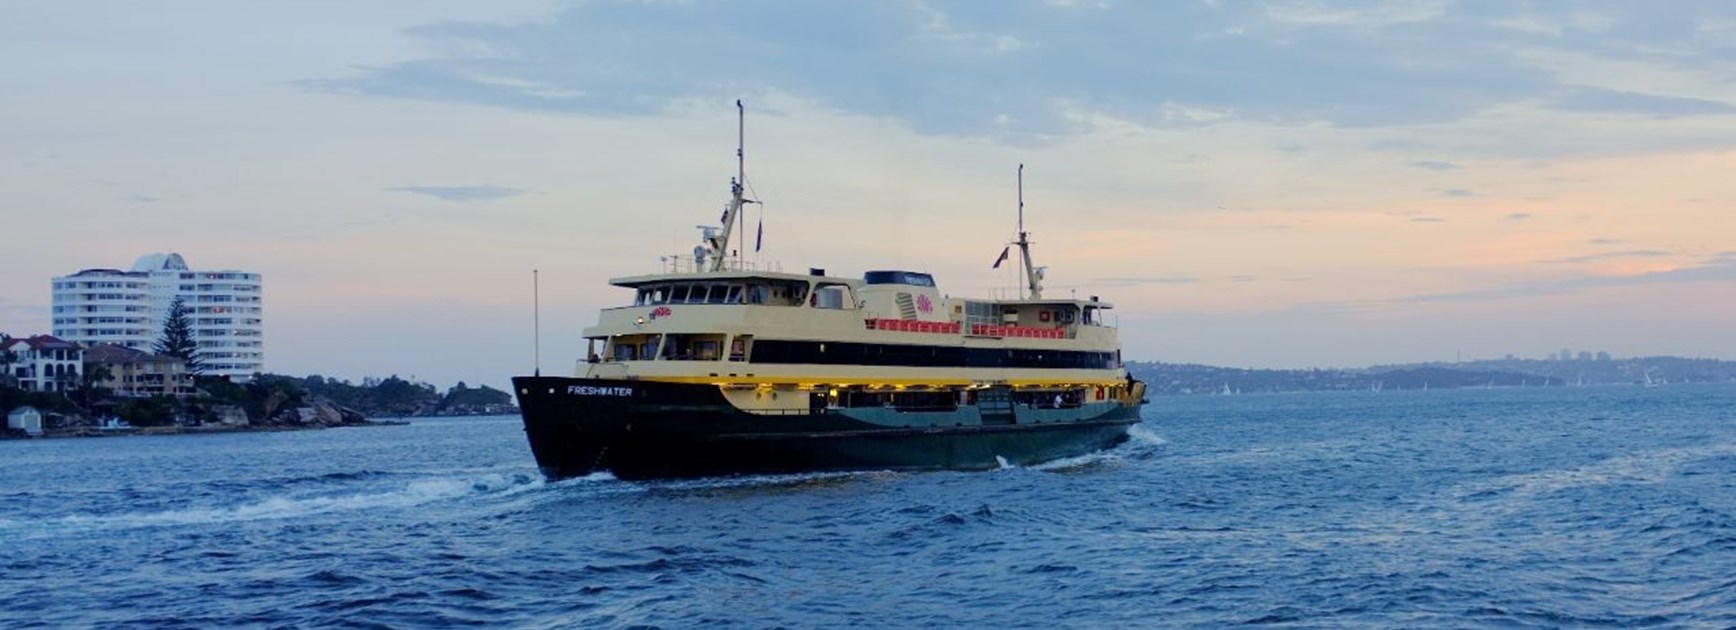 Catch a Manly Ferry for Roosters game